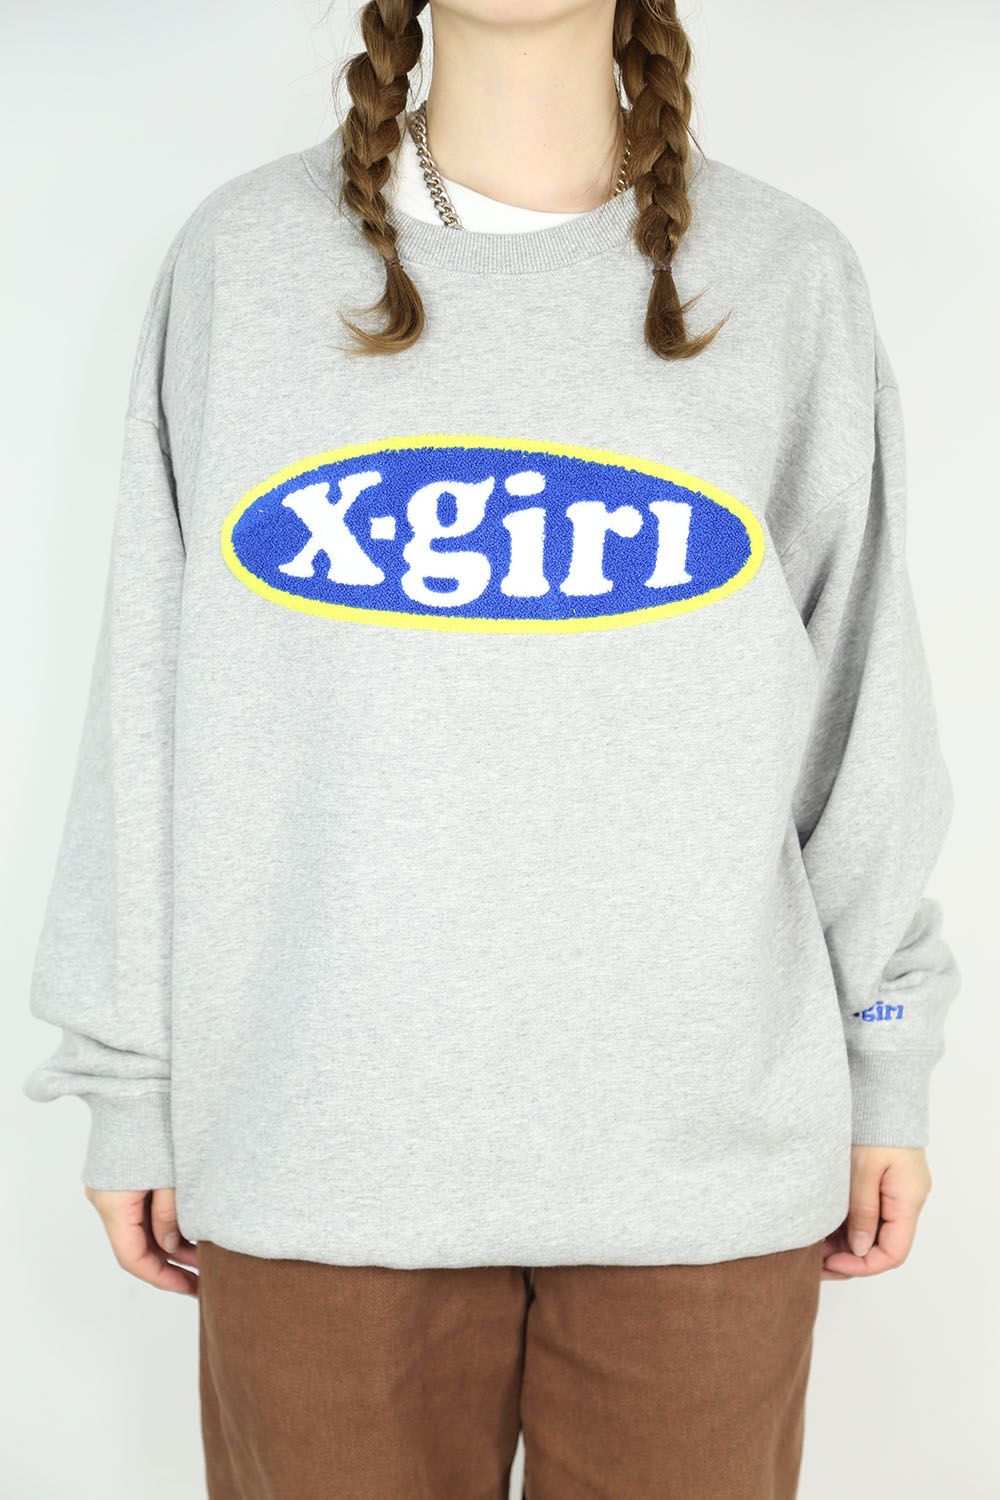 X-girl - CHENILLE EMBROIDERY OVAL LOGO CREW SWEAT TOP ...